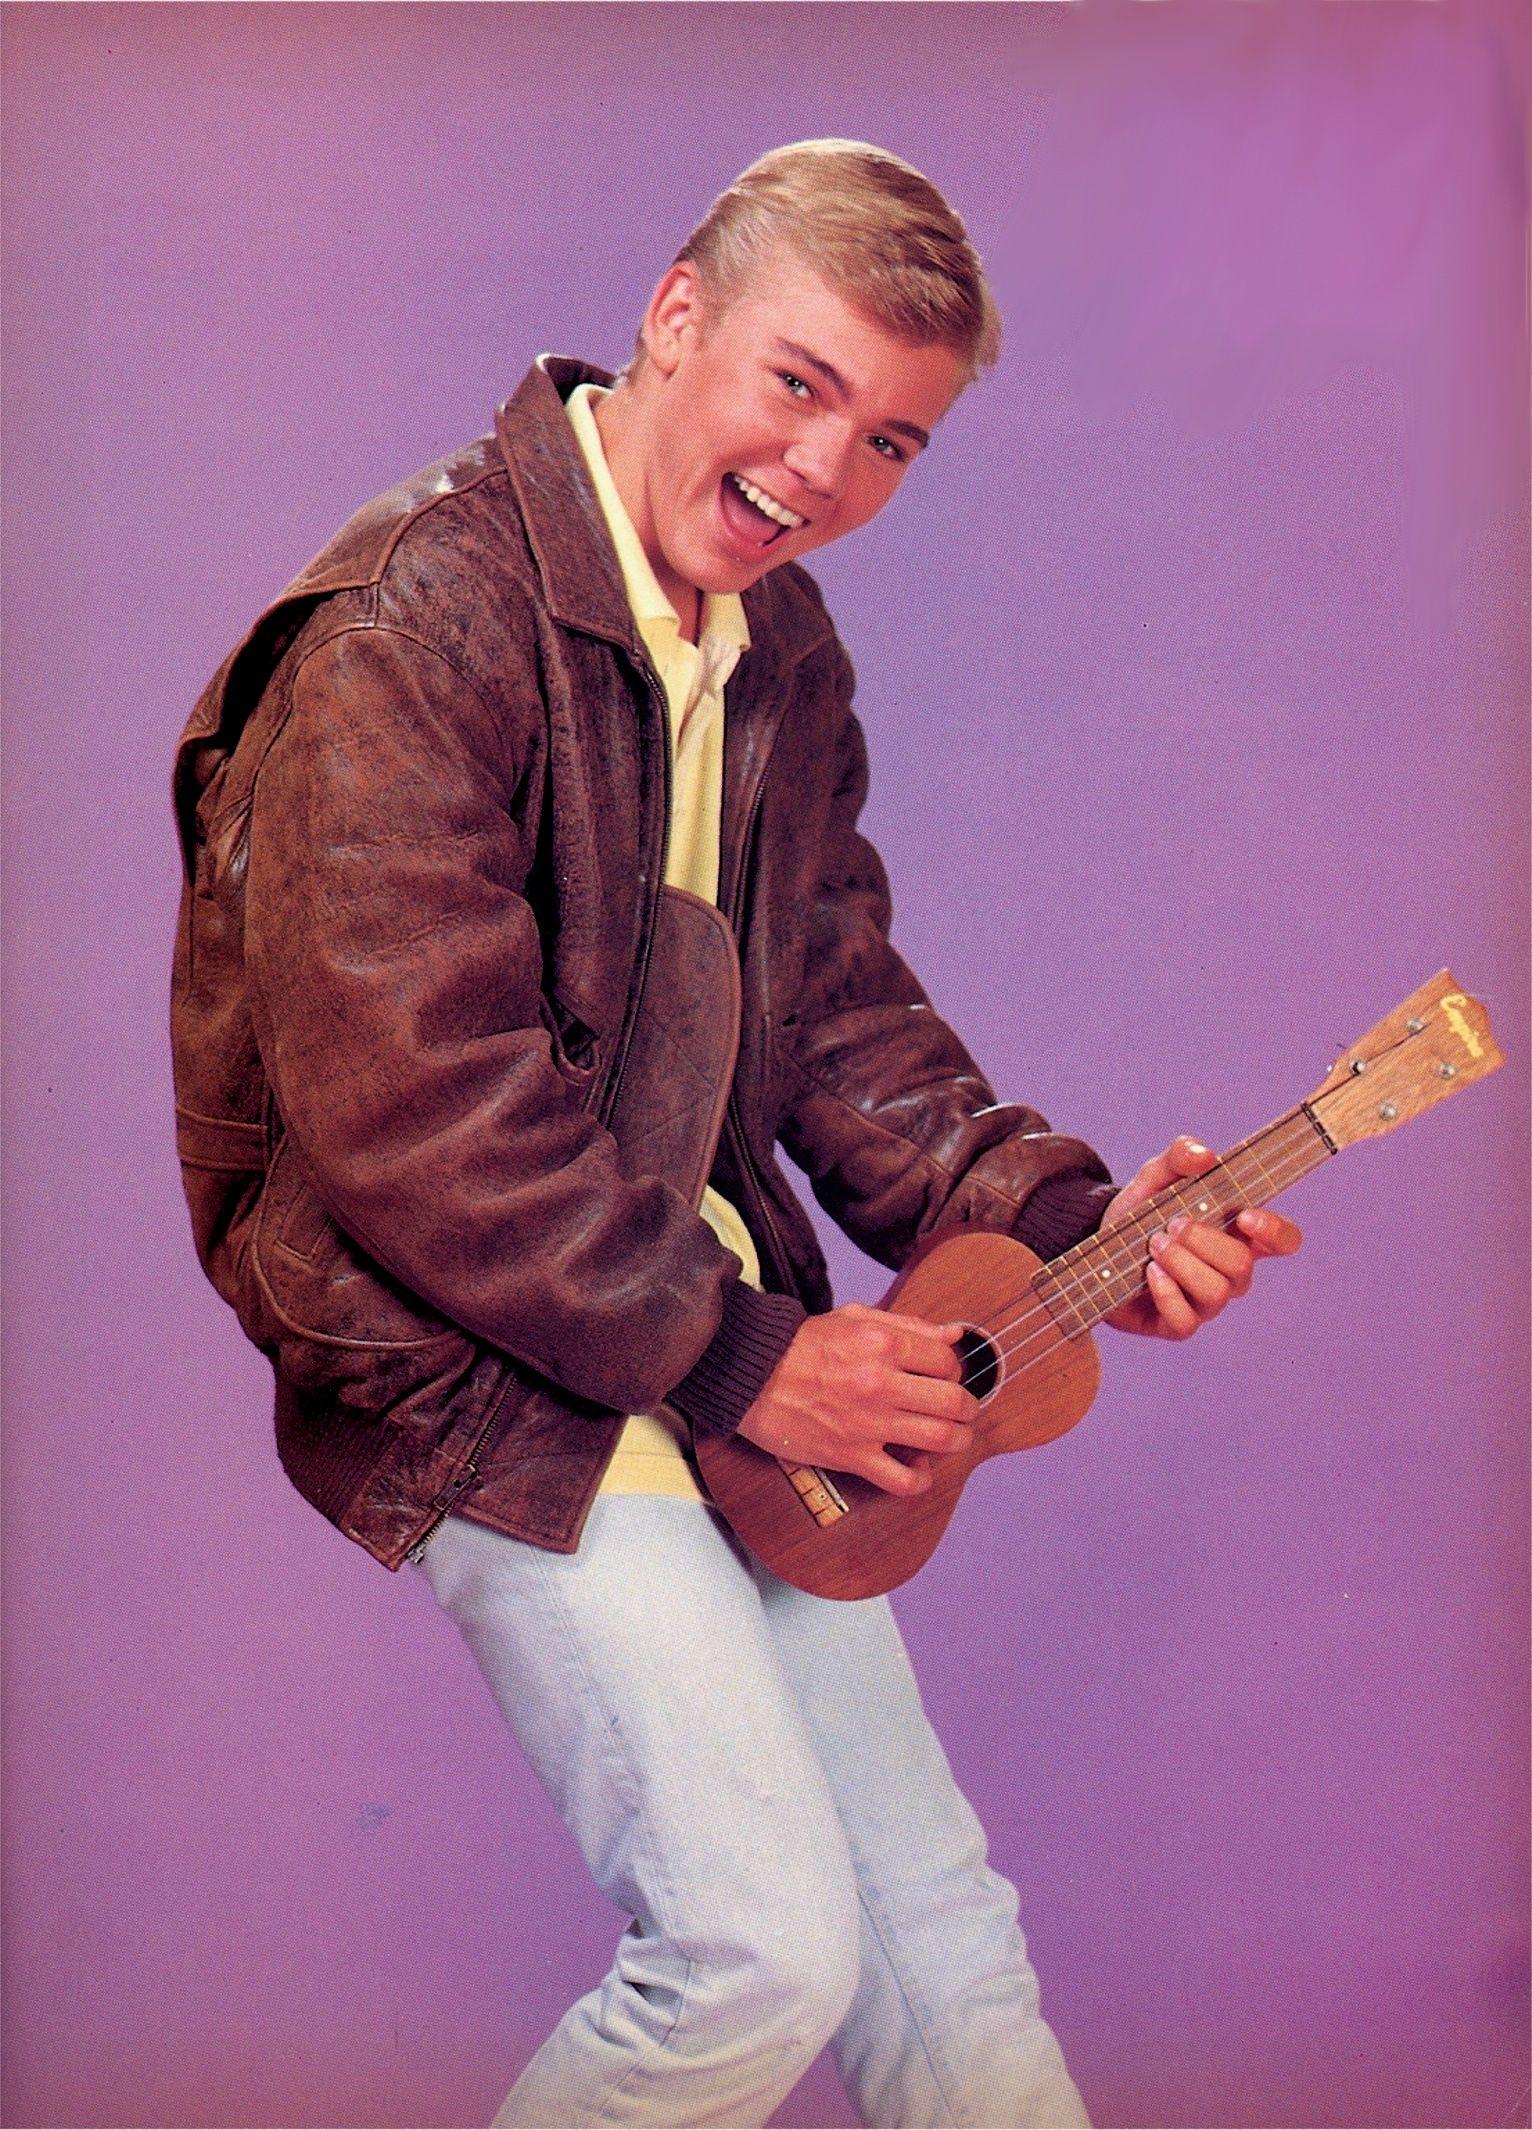 Pictures of Ricky Schroder.